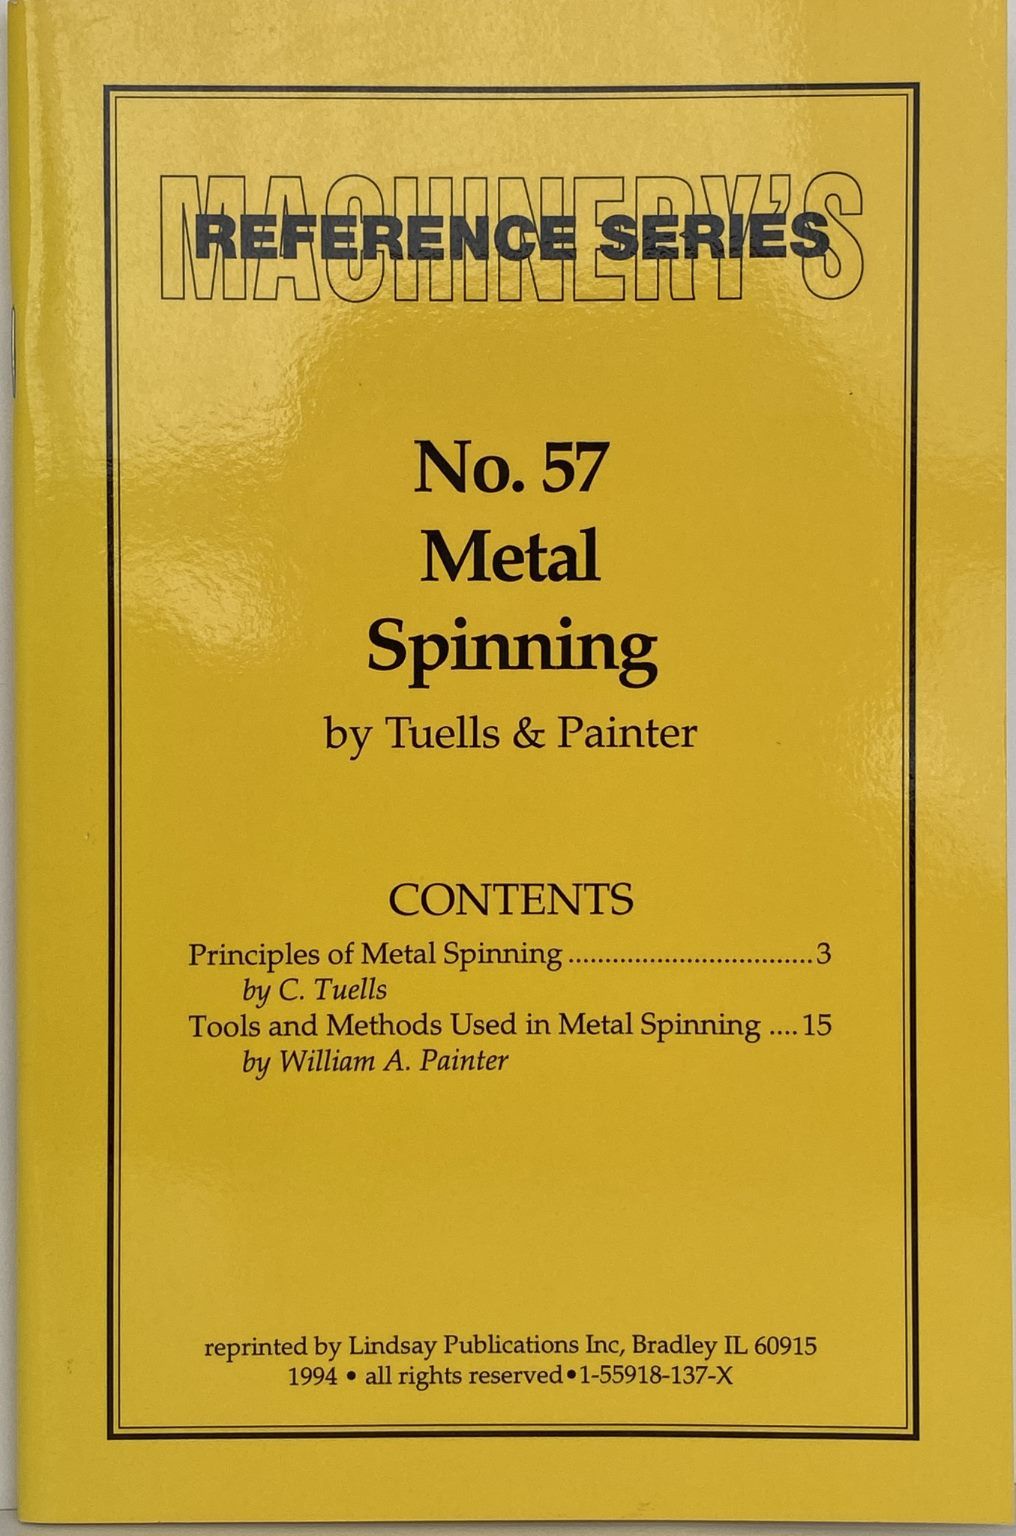 METAL SPINNING: Machinery's Reference Series No. 57